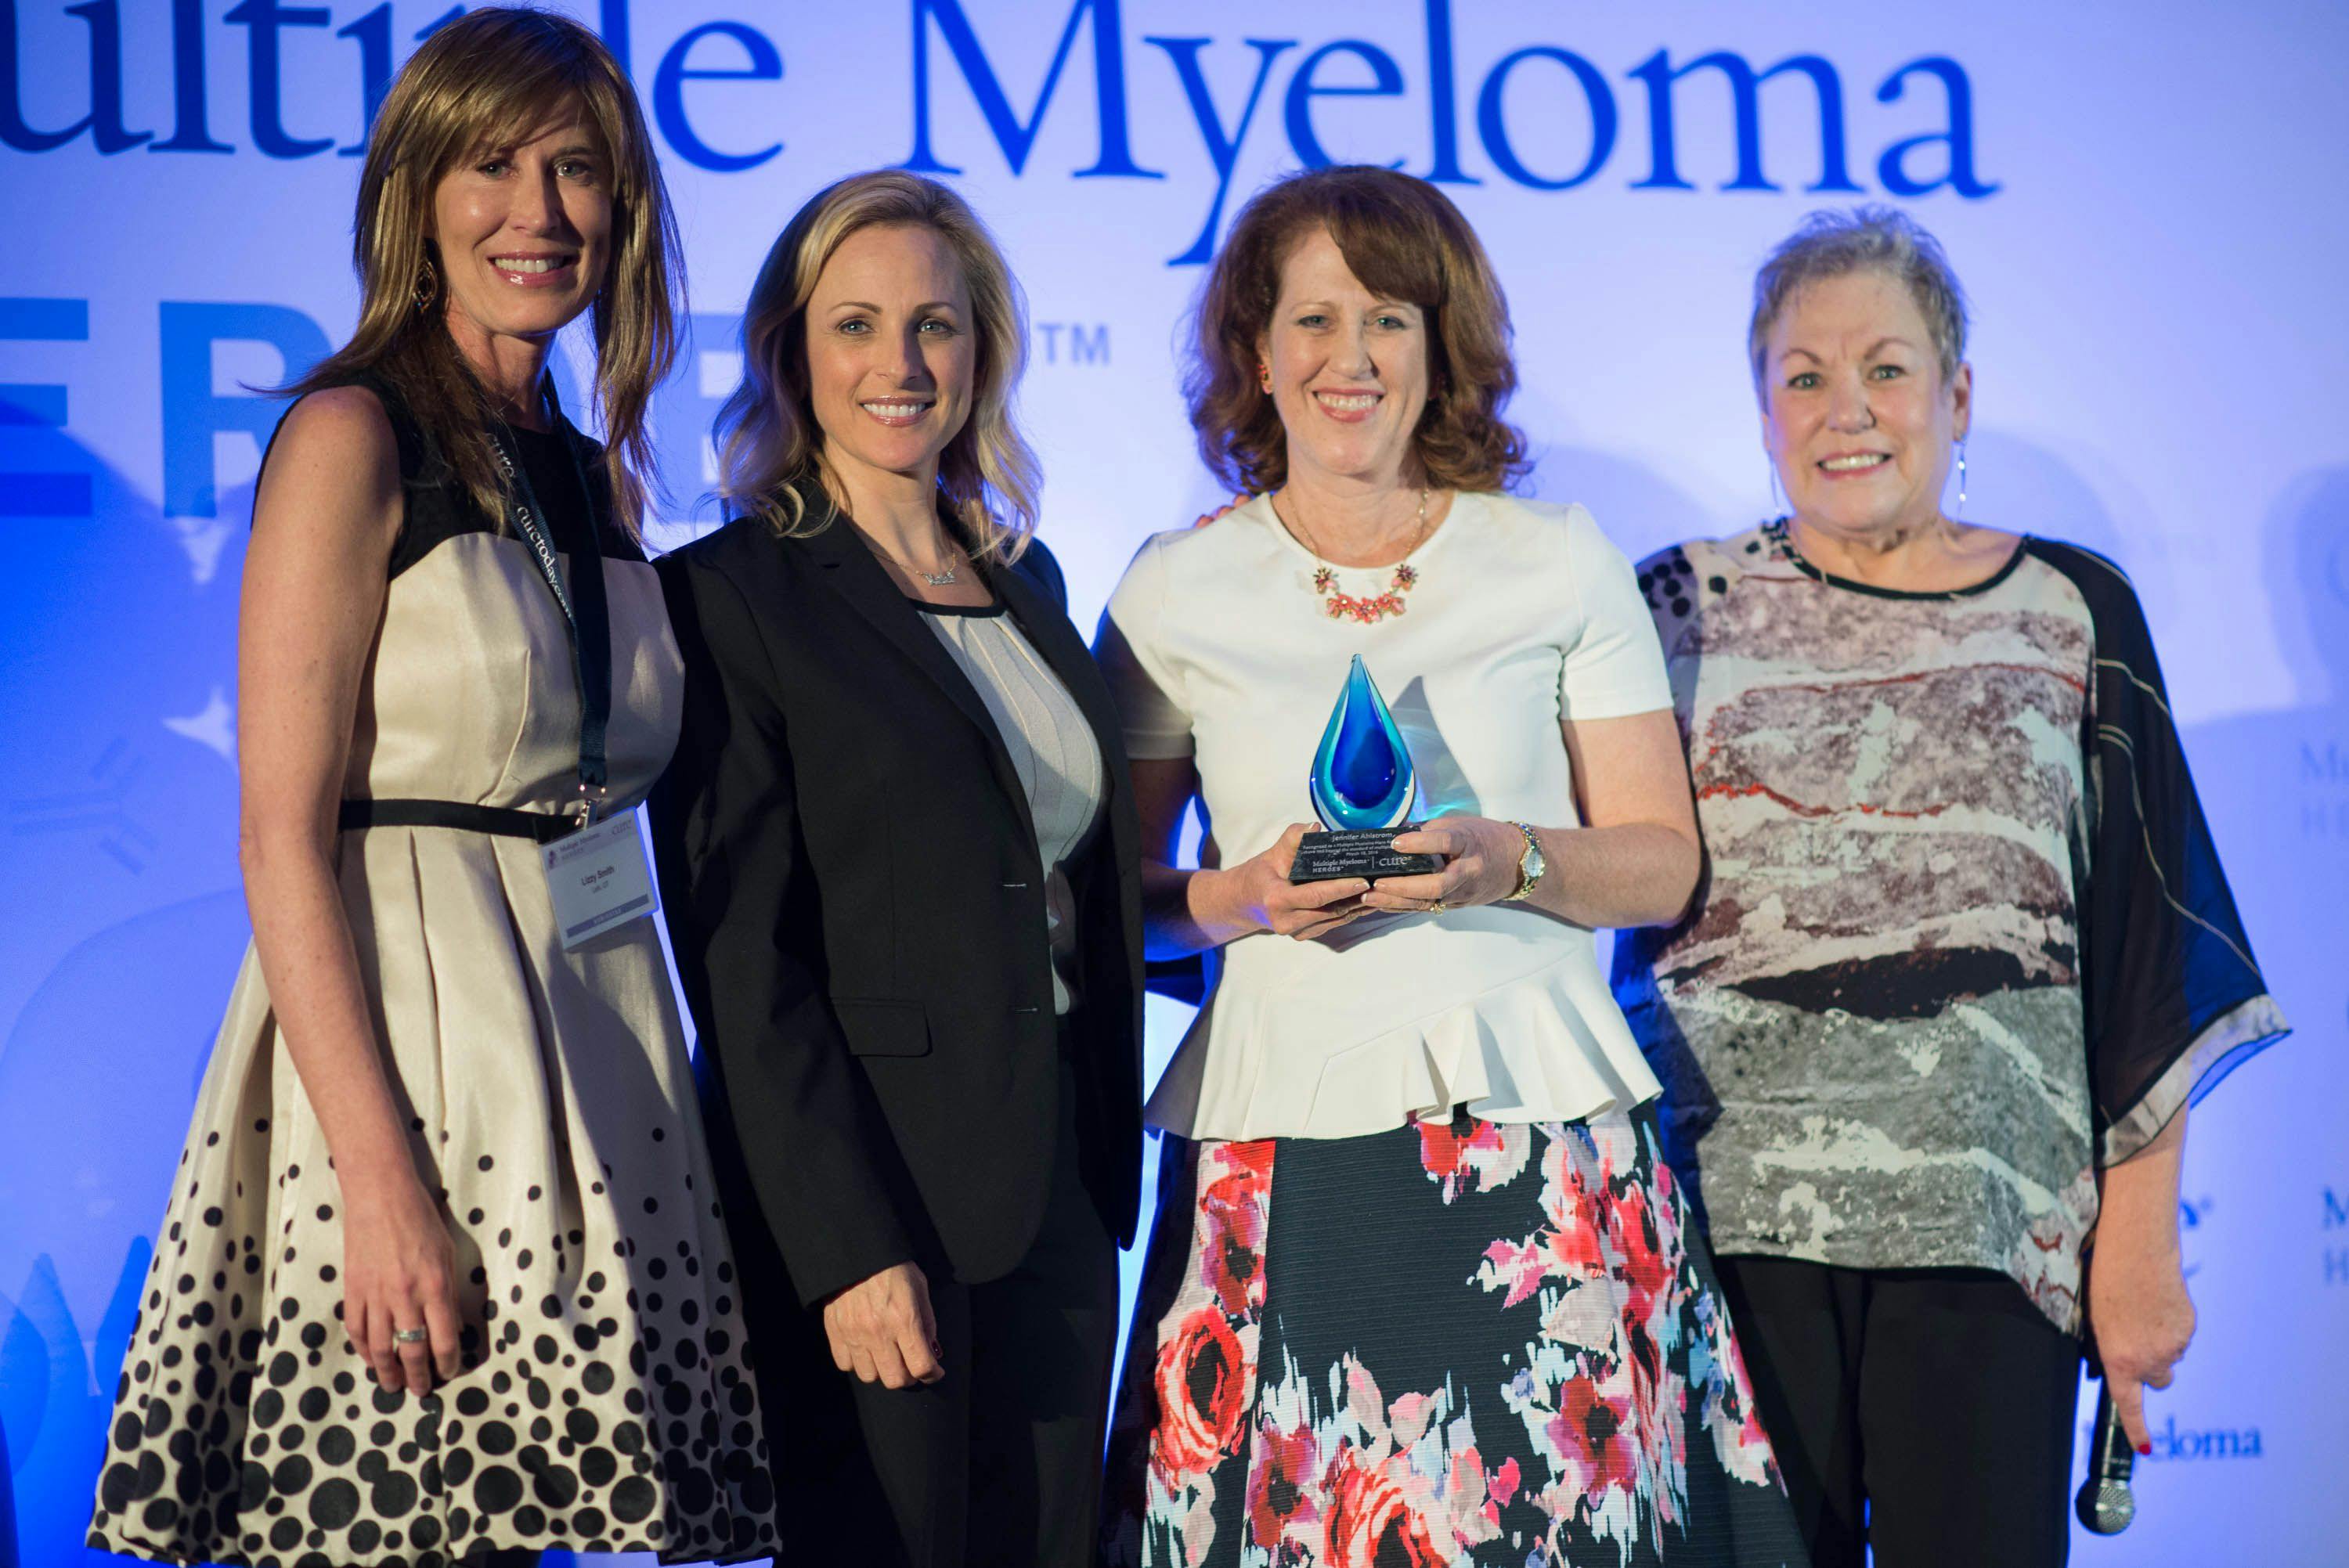 In her keynote speech, TV and movie actress Marlee Matlin (second from left) spoke about her father's diagnosis with multiple myeloma, dealing with adversity by cultivating a good sense of humor, and more.